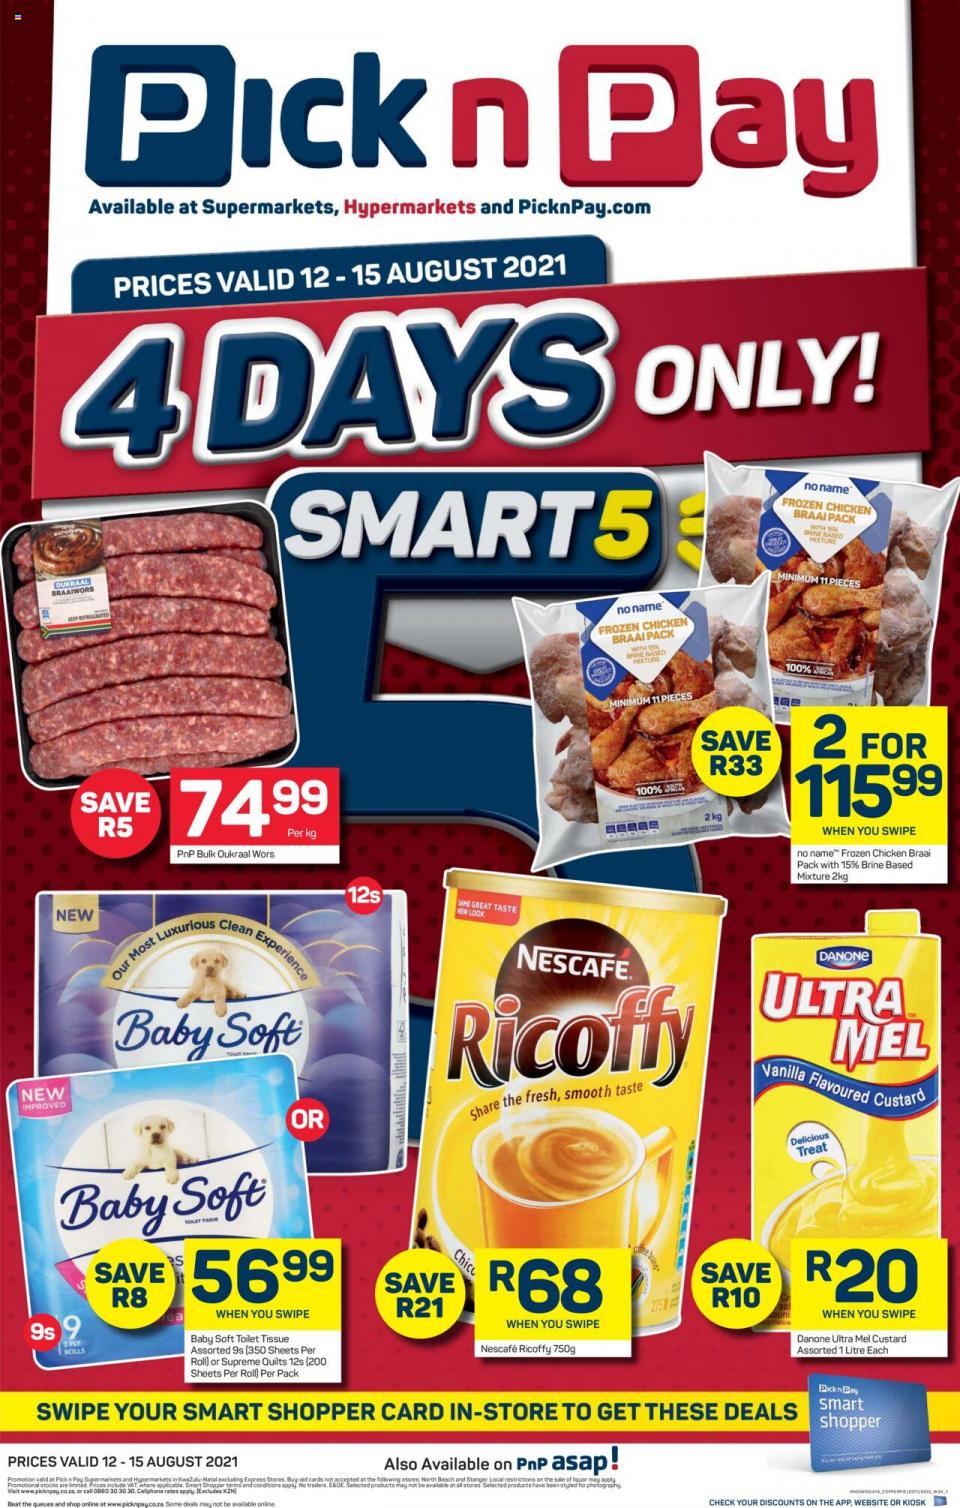 Pick n Pay Specials Weeked Deals 12 – 15 August 2021